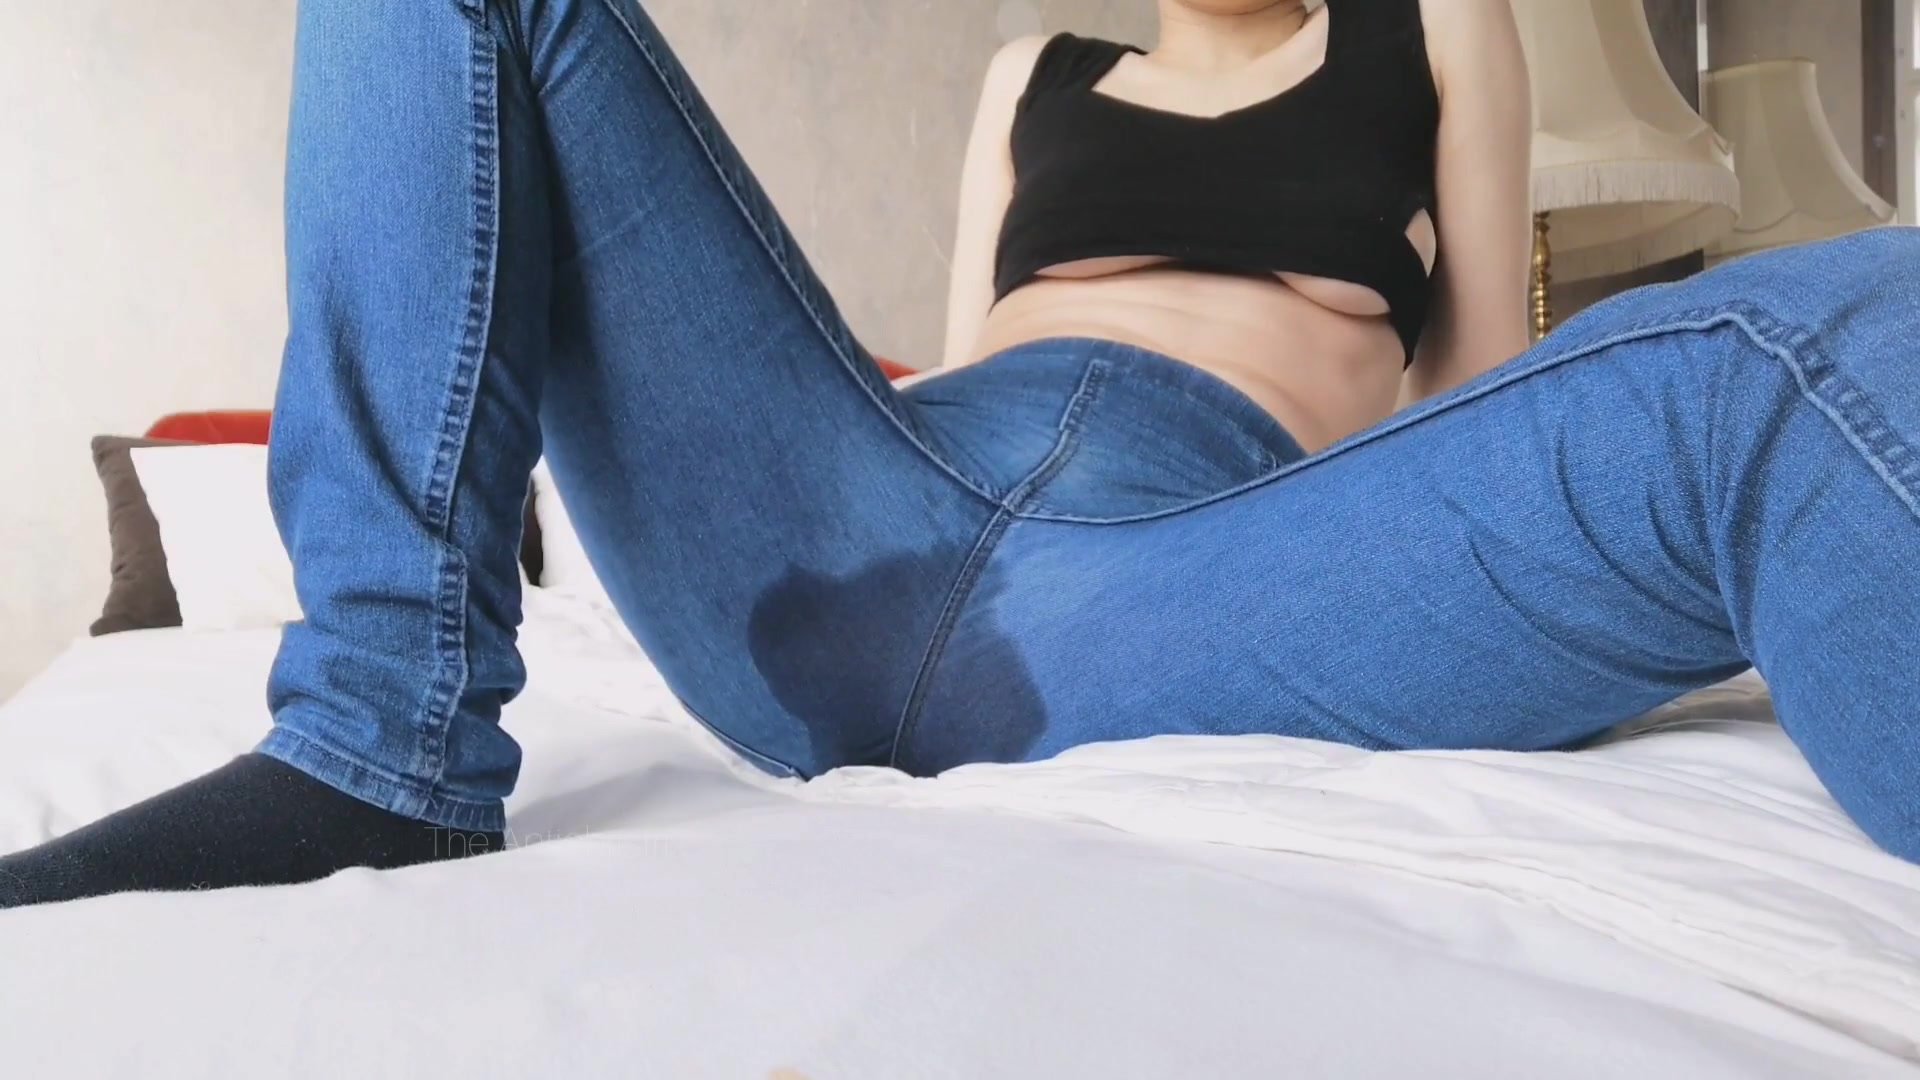 Pissing jeans in bed